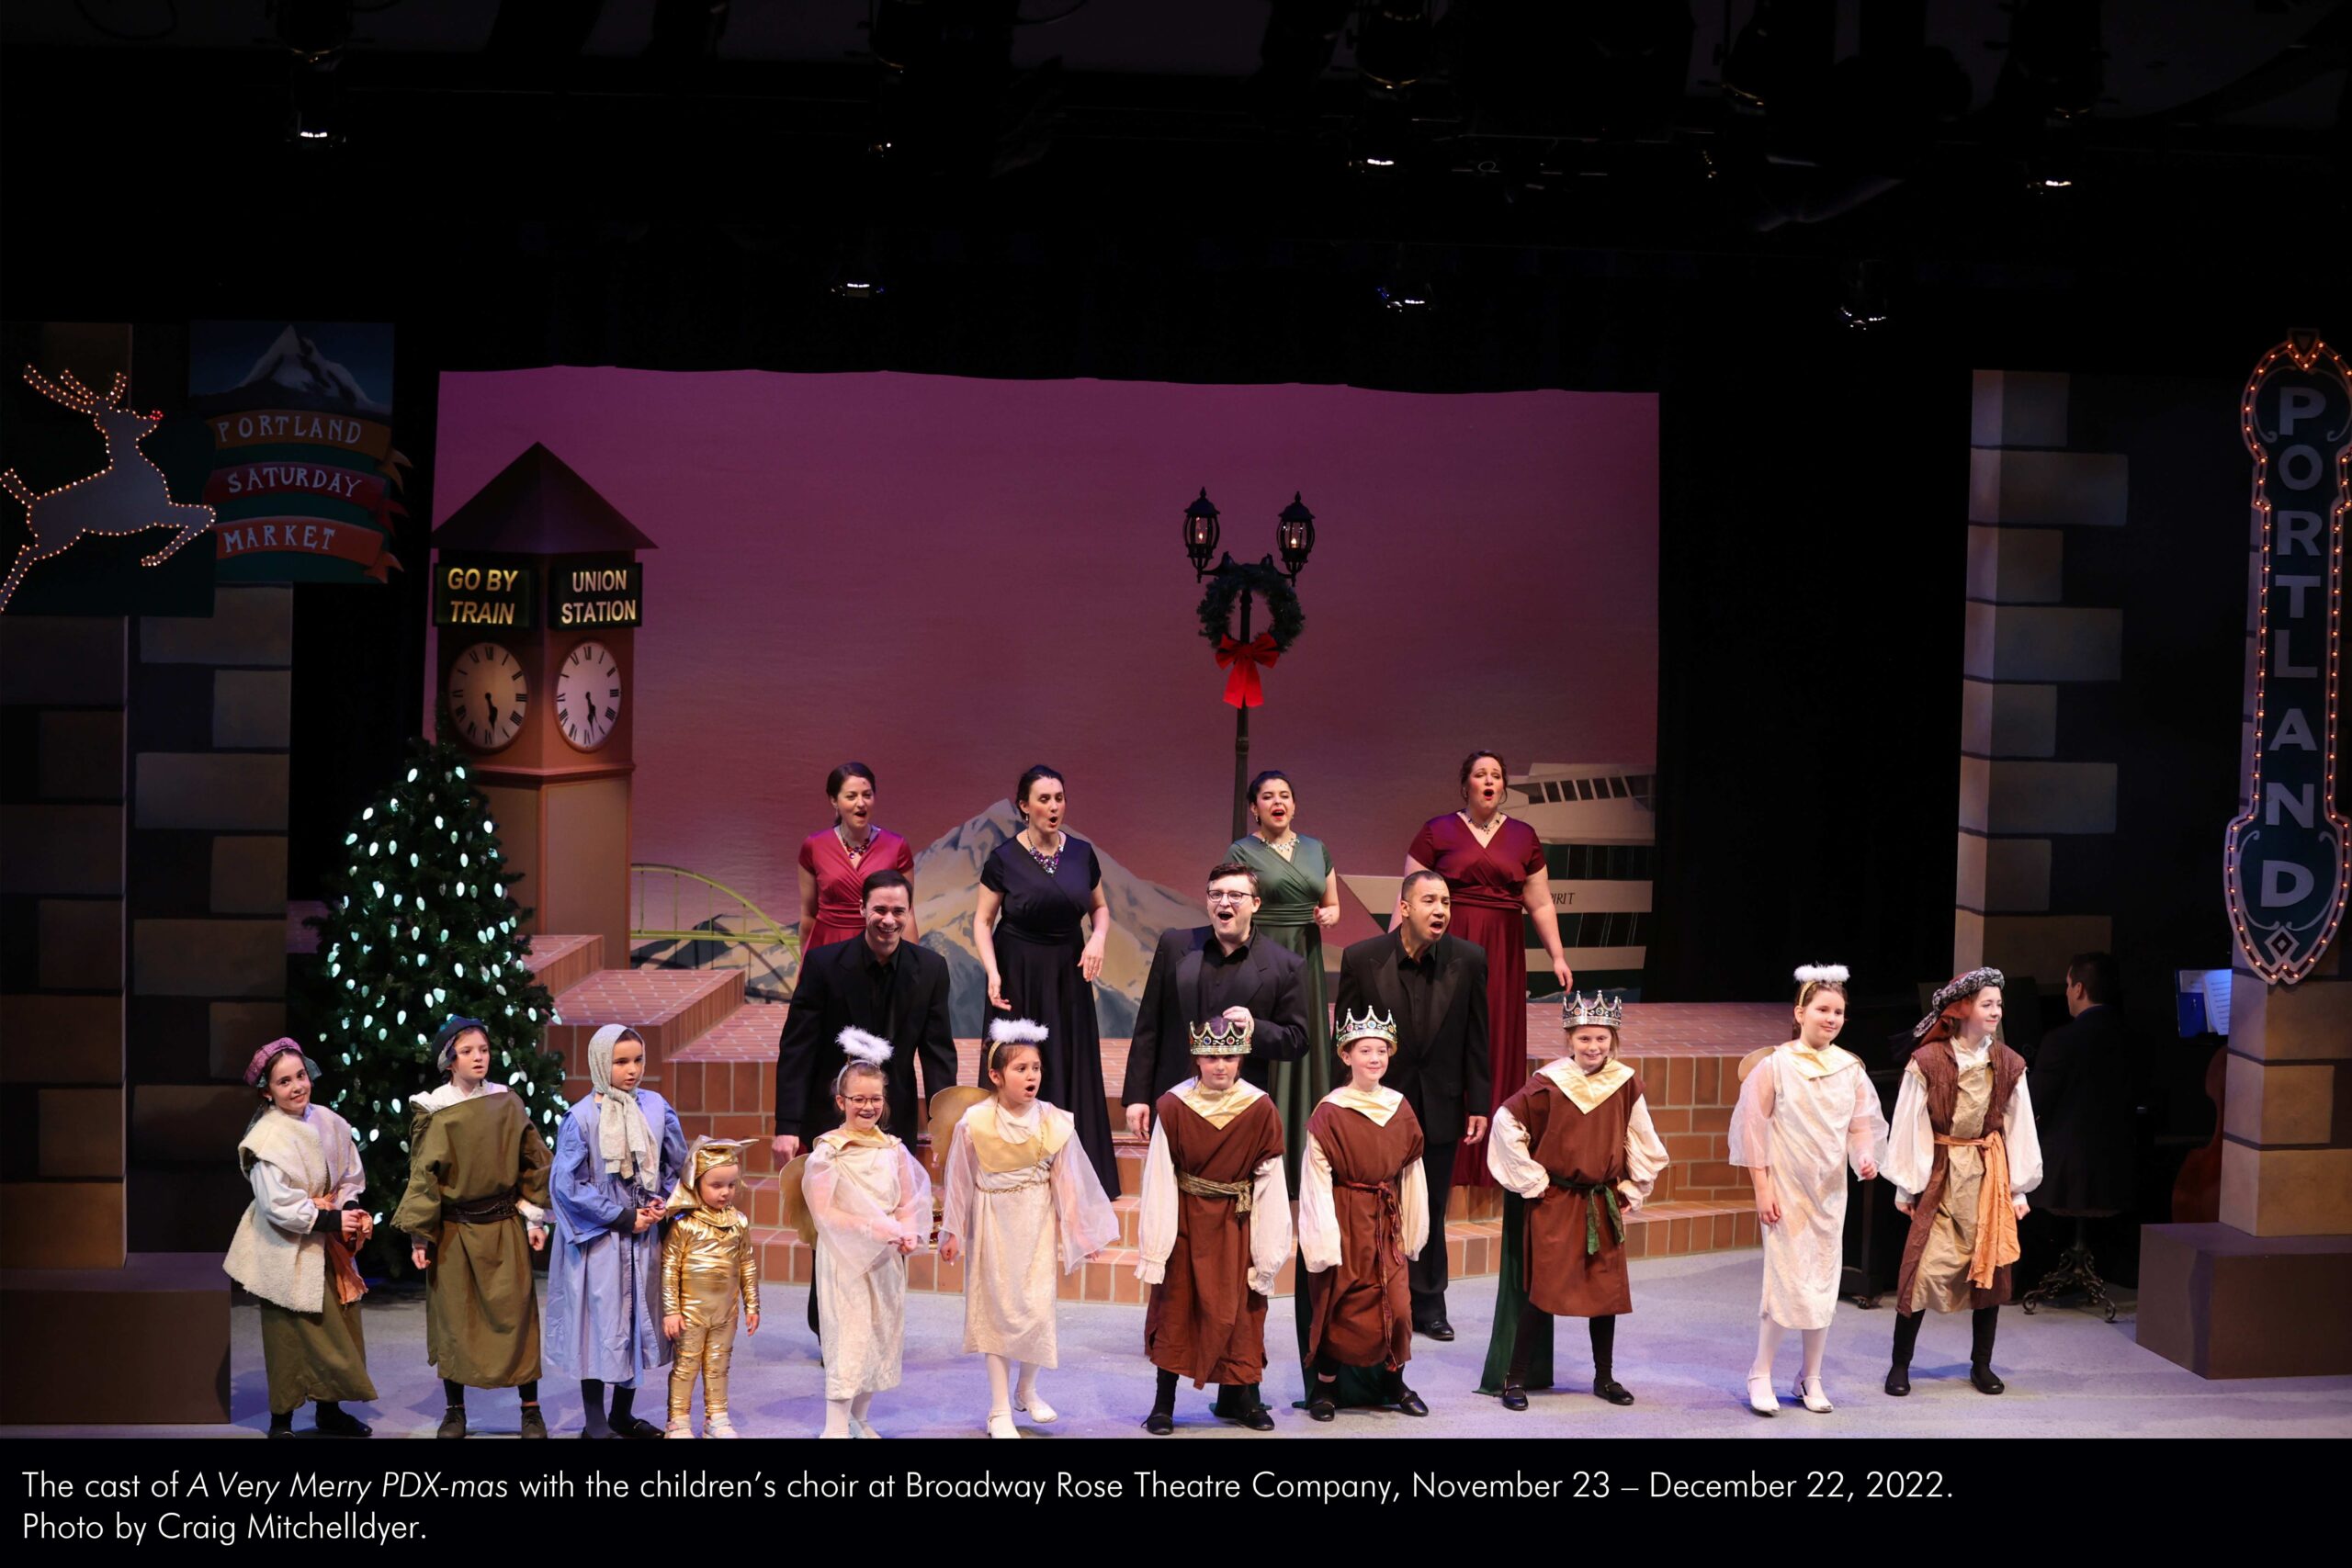 The cast of A Very Merry PDX-mas at Broadway Rose Theatre Company, November 23 - December 22, 2022. Photo by Craig Mitchelldyer.